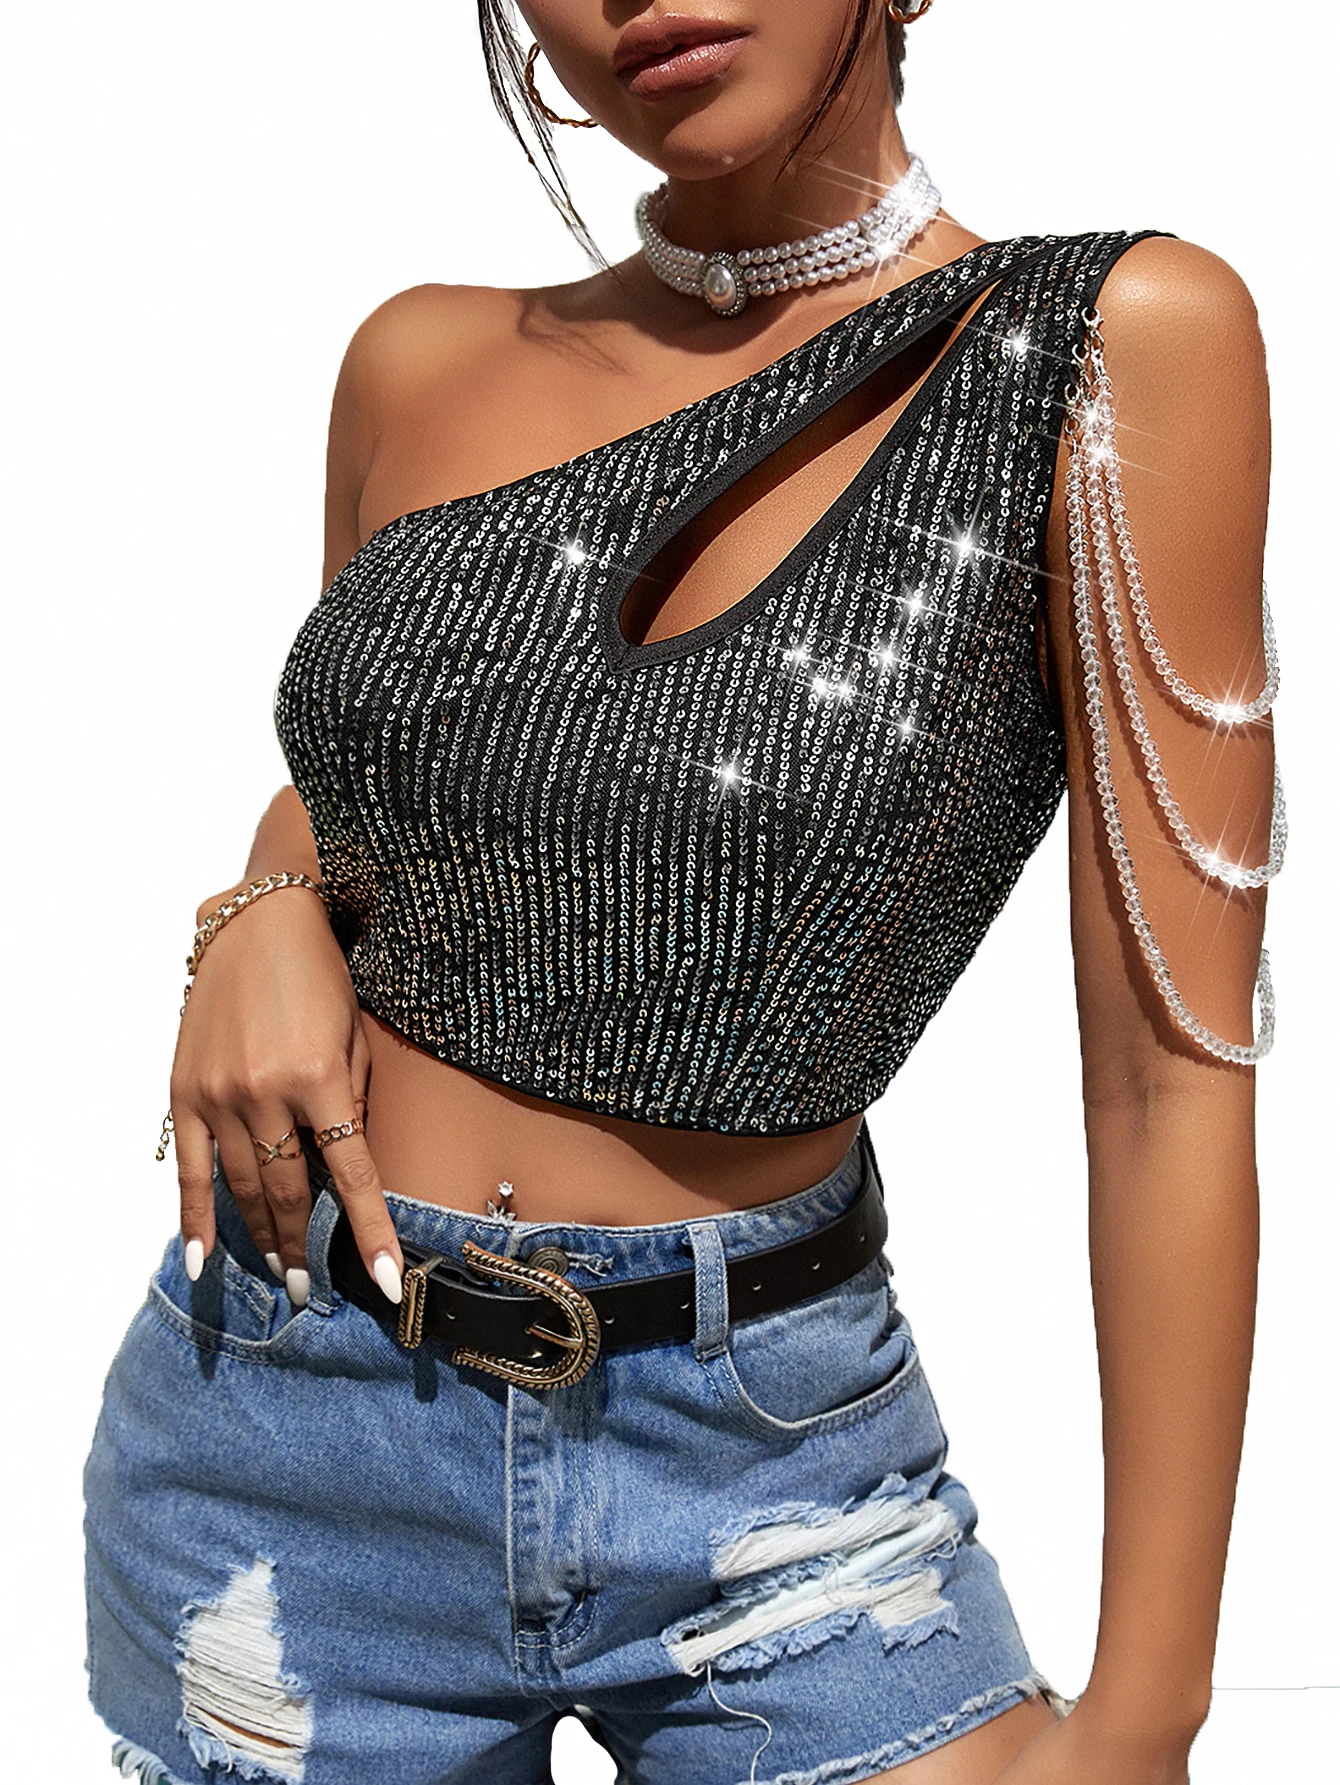 2022 New Women's Sequin Wear Slanted Shoulder Vest Party With Bottom Personality Casual Top Slim Top Black Gold Silver Sparkly